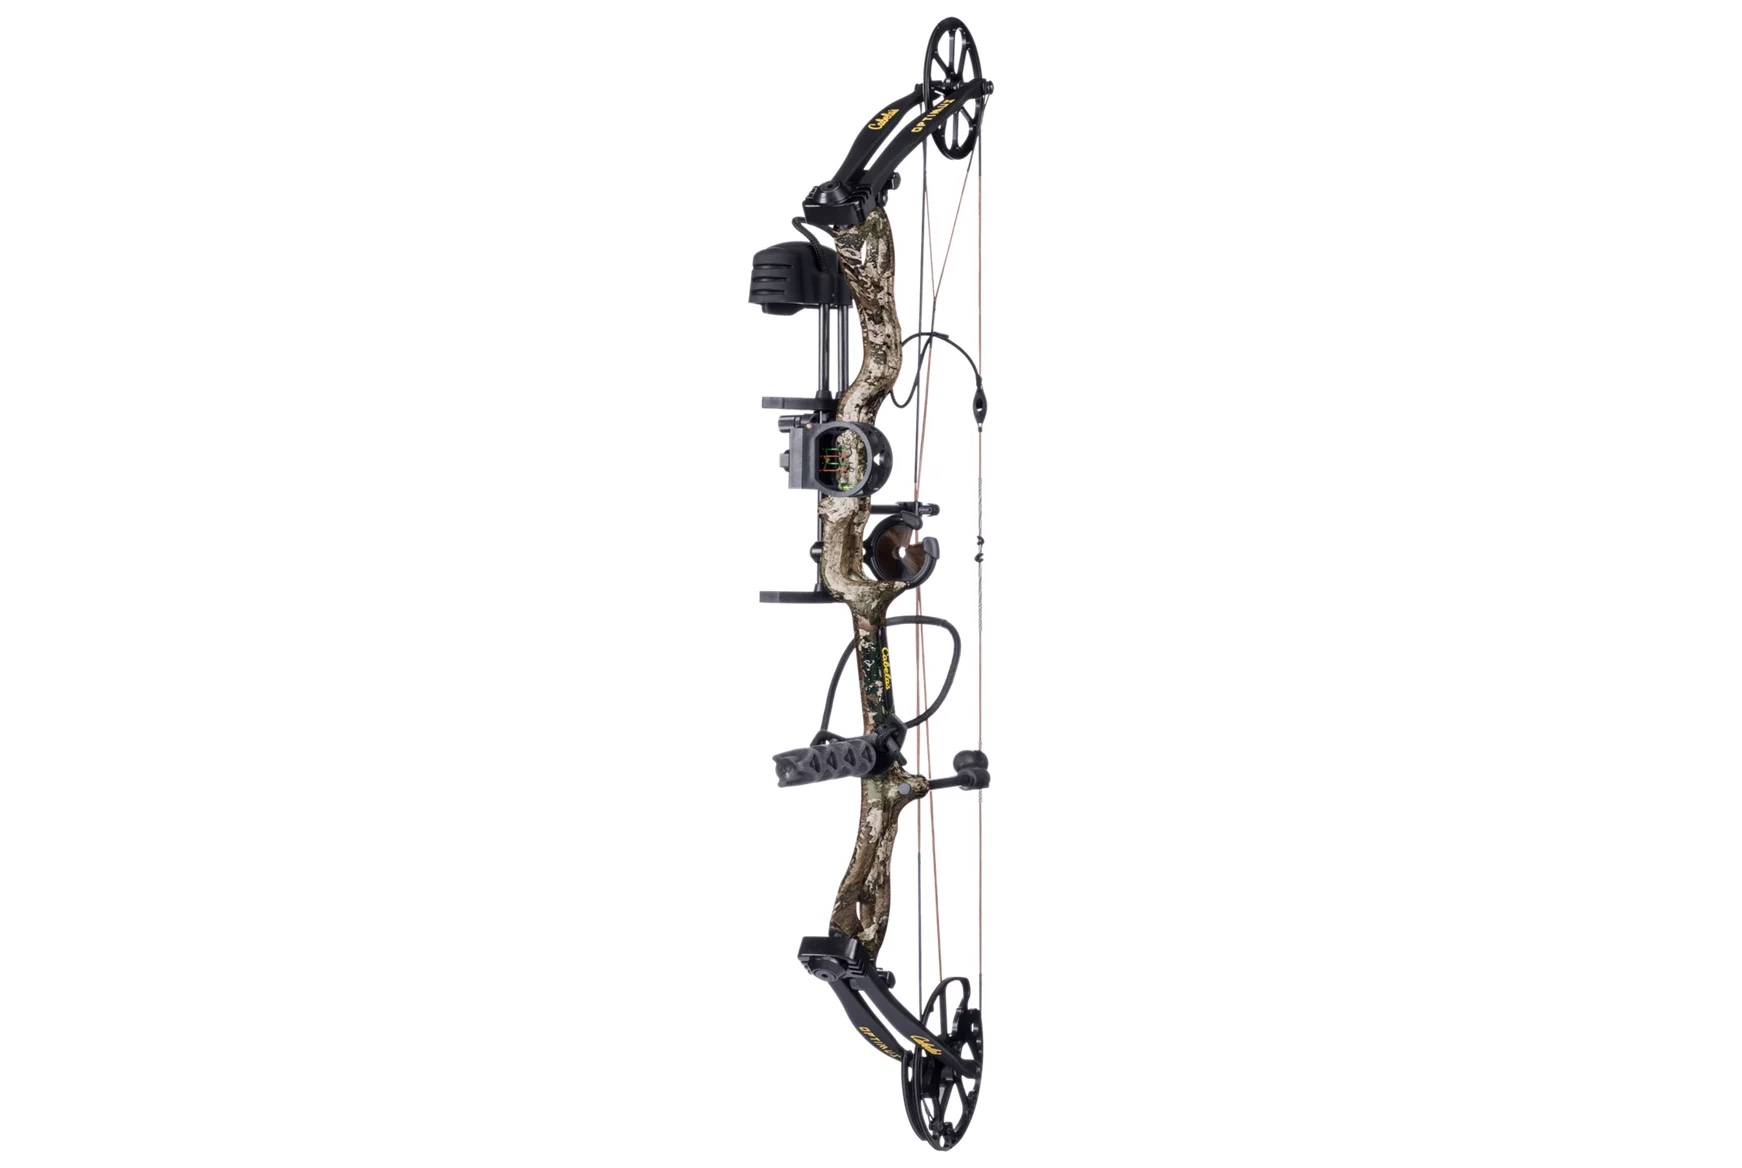 The Best Cabela’s Deals for Bowhunting of 2023